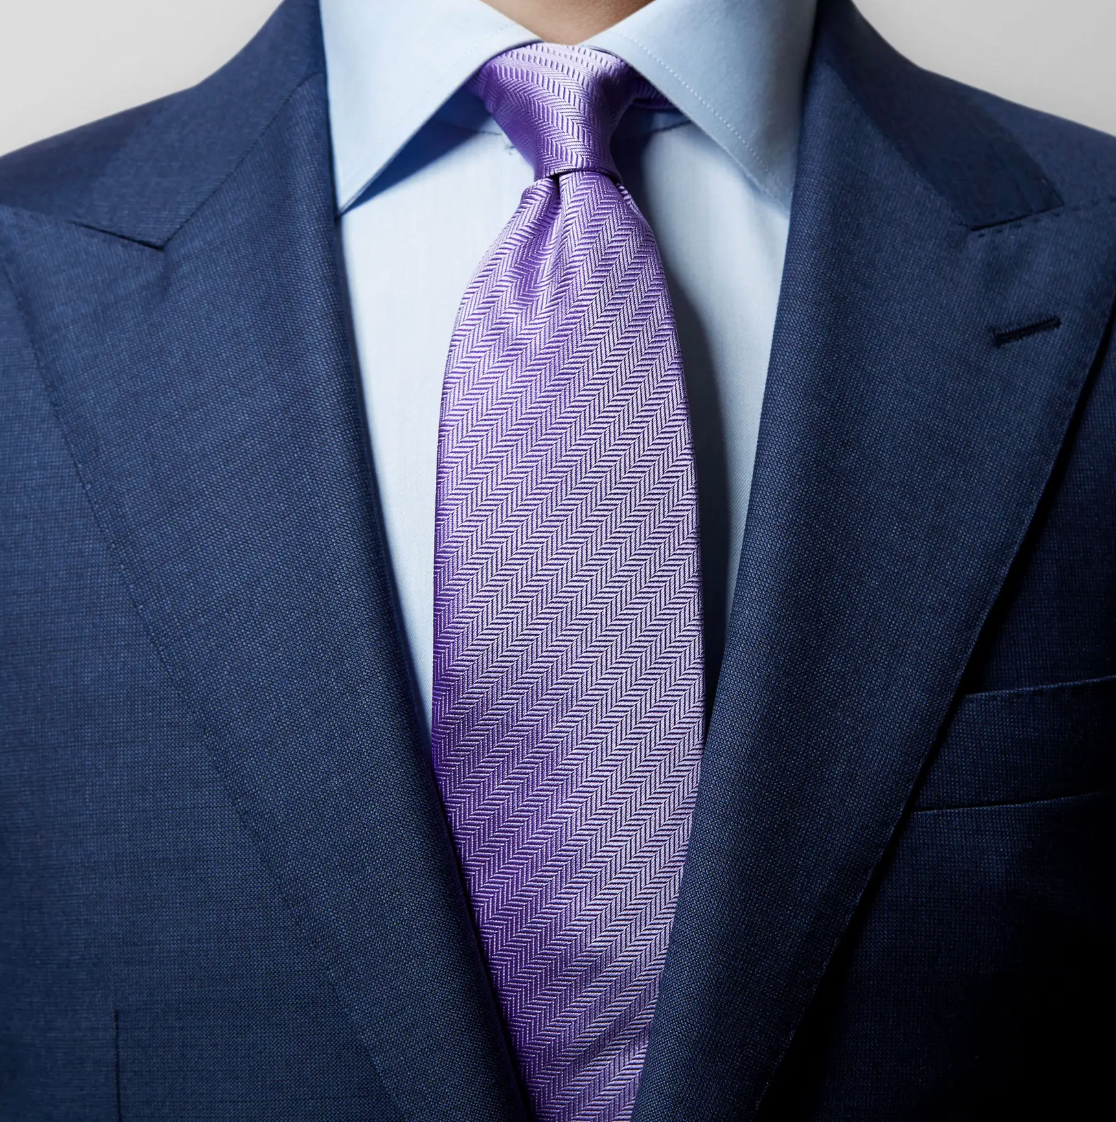 Best Tie for Navy Suit | Our Top 4 List of Ties for Blue Suits